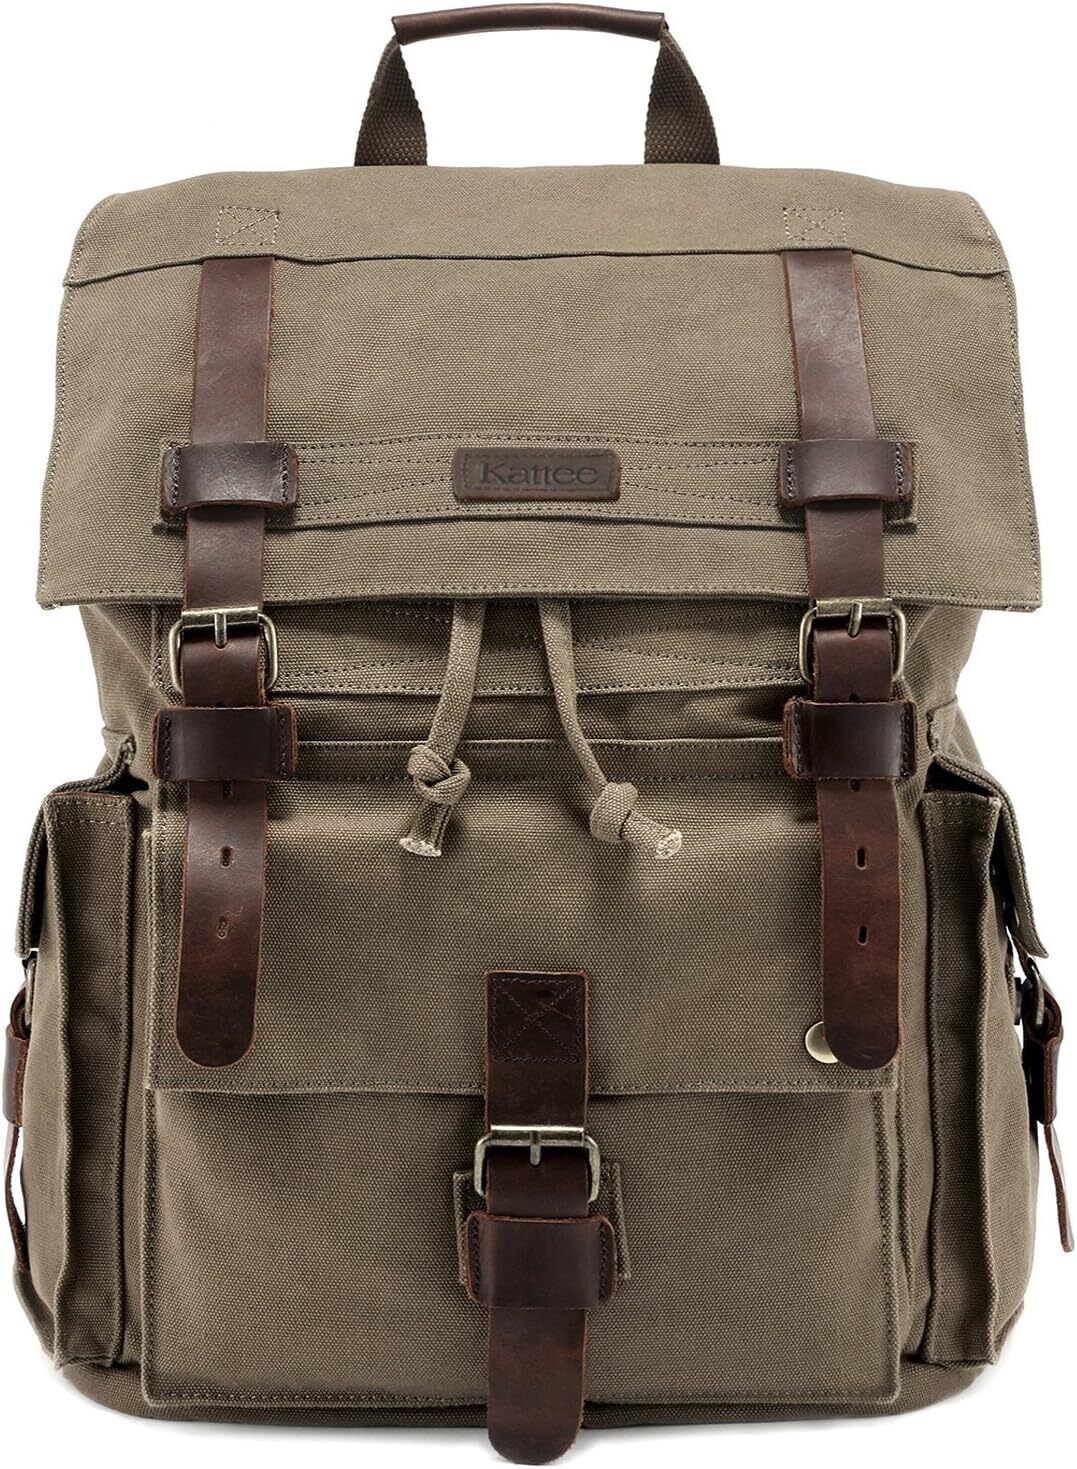 Kattee Men's Canvas Leather Hiking Travel Backpack Army Green 